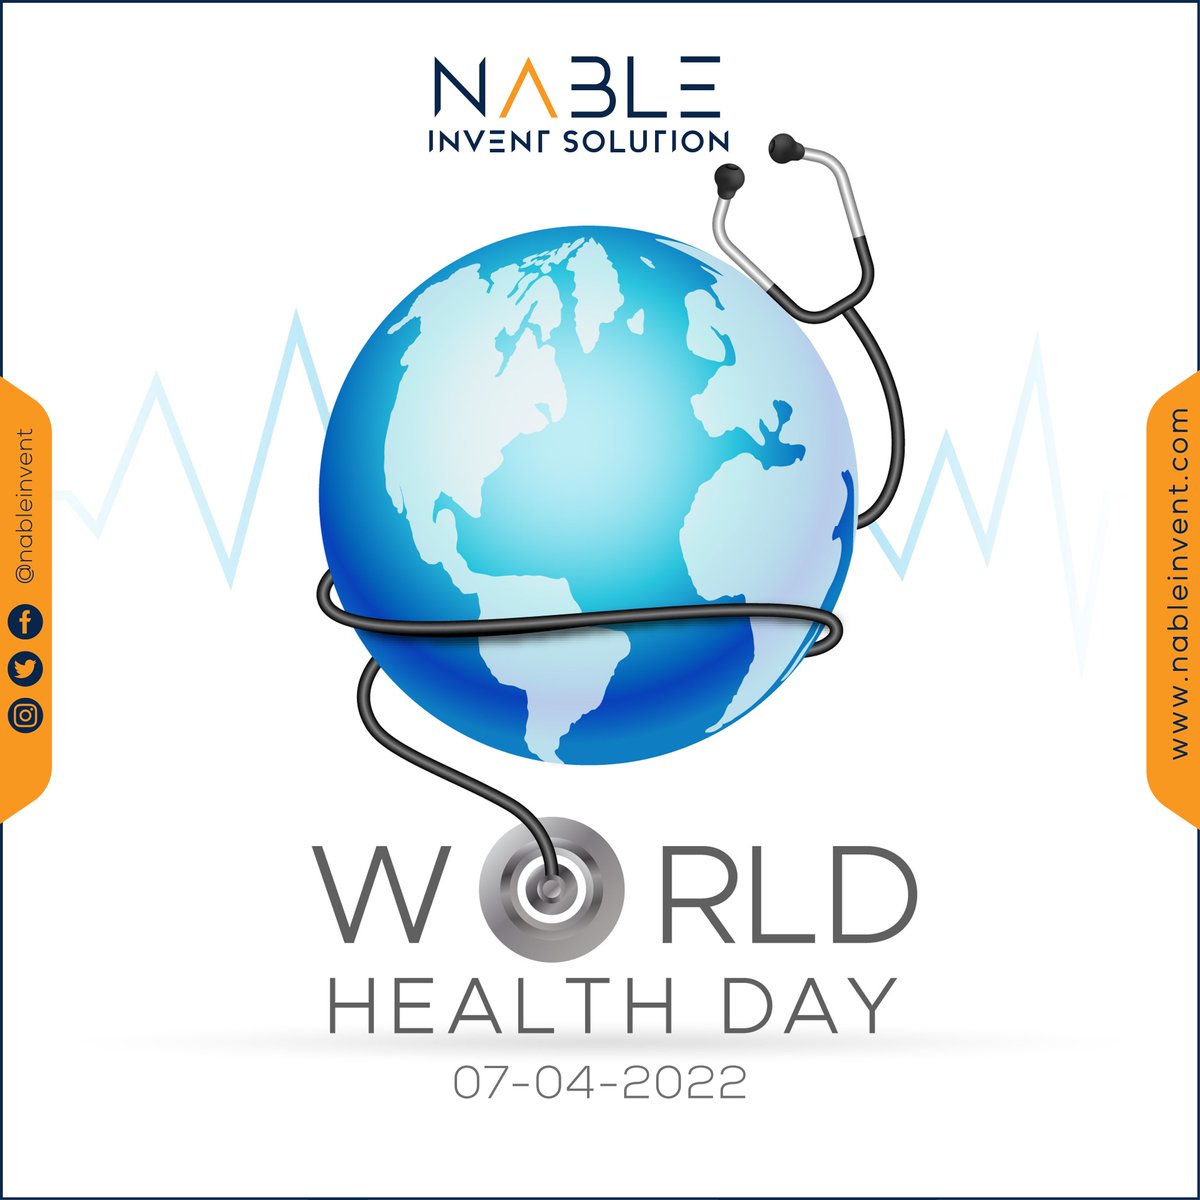 A healthy body is the guest chamber of the soul; a sick, its prison. -Francis Bacon.
#healthday #worldhealthday #health #covid #who #healthylife #internationalhealthday #worldhealth #globalhealth #globalhealthday #fitness #nableinvent